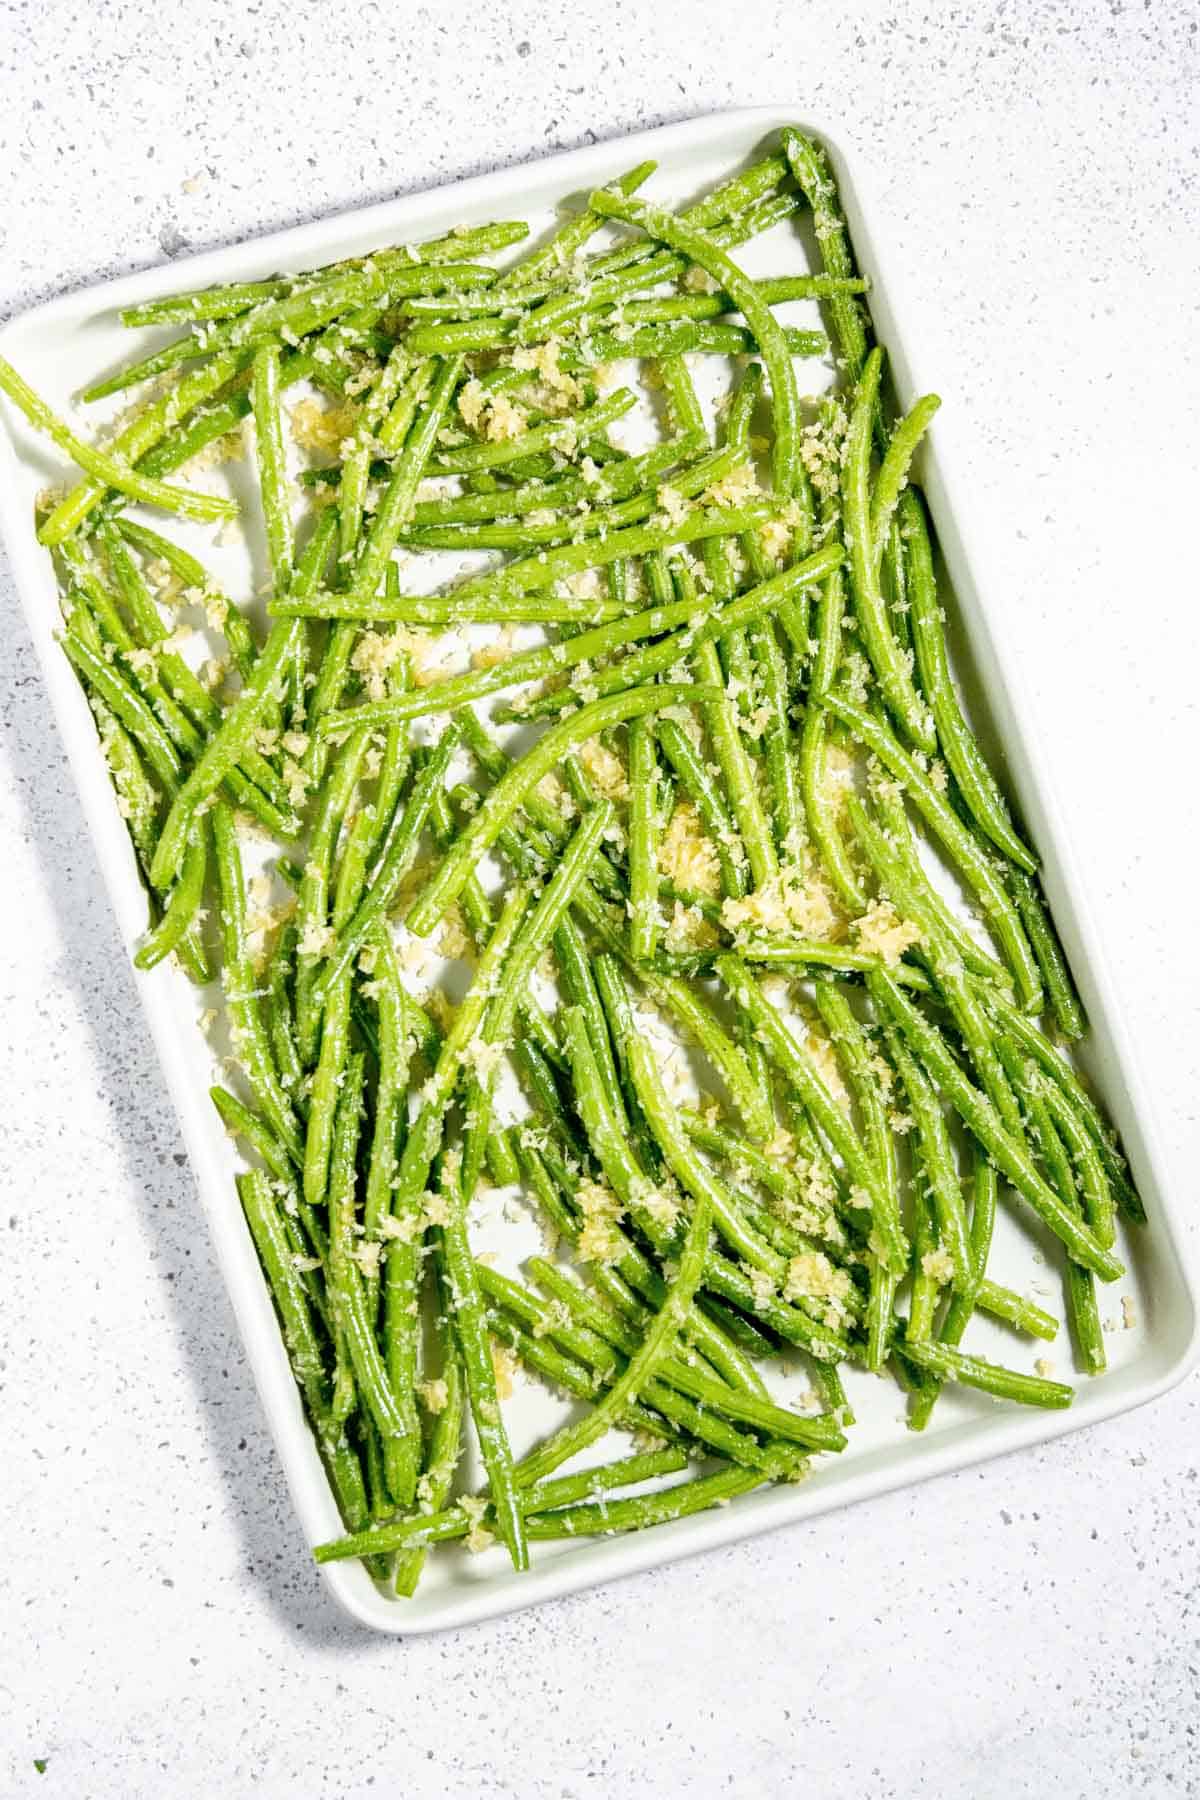 Roasted green beans on a white plate.